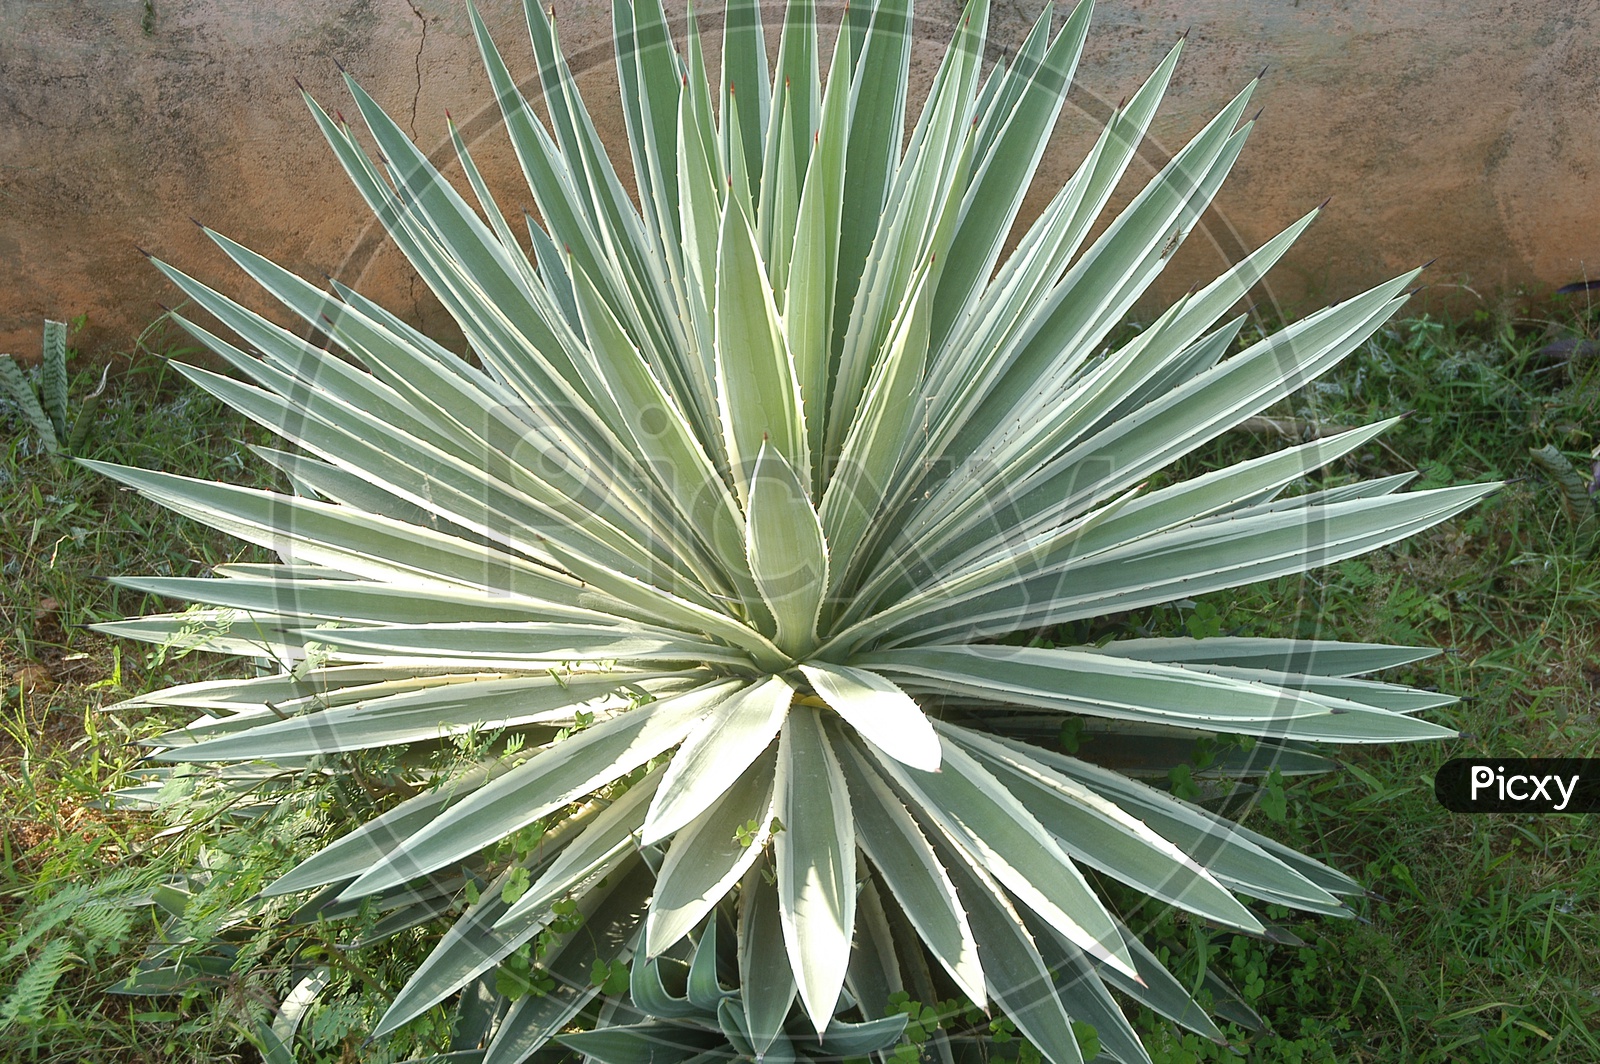 Agave tequilana